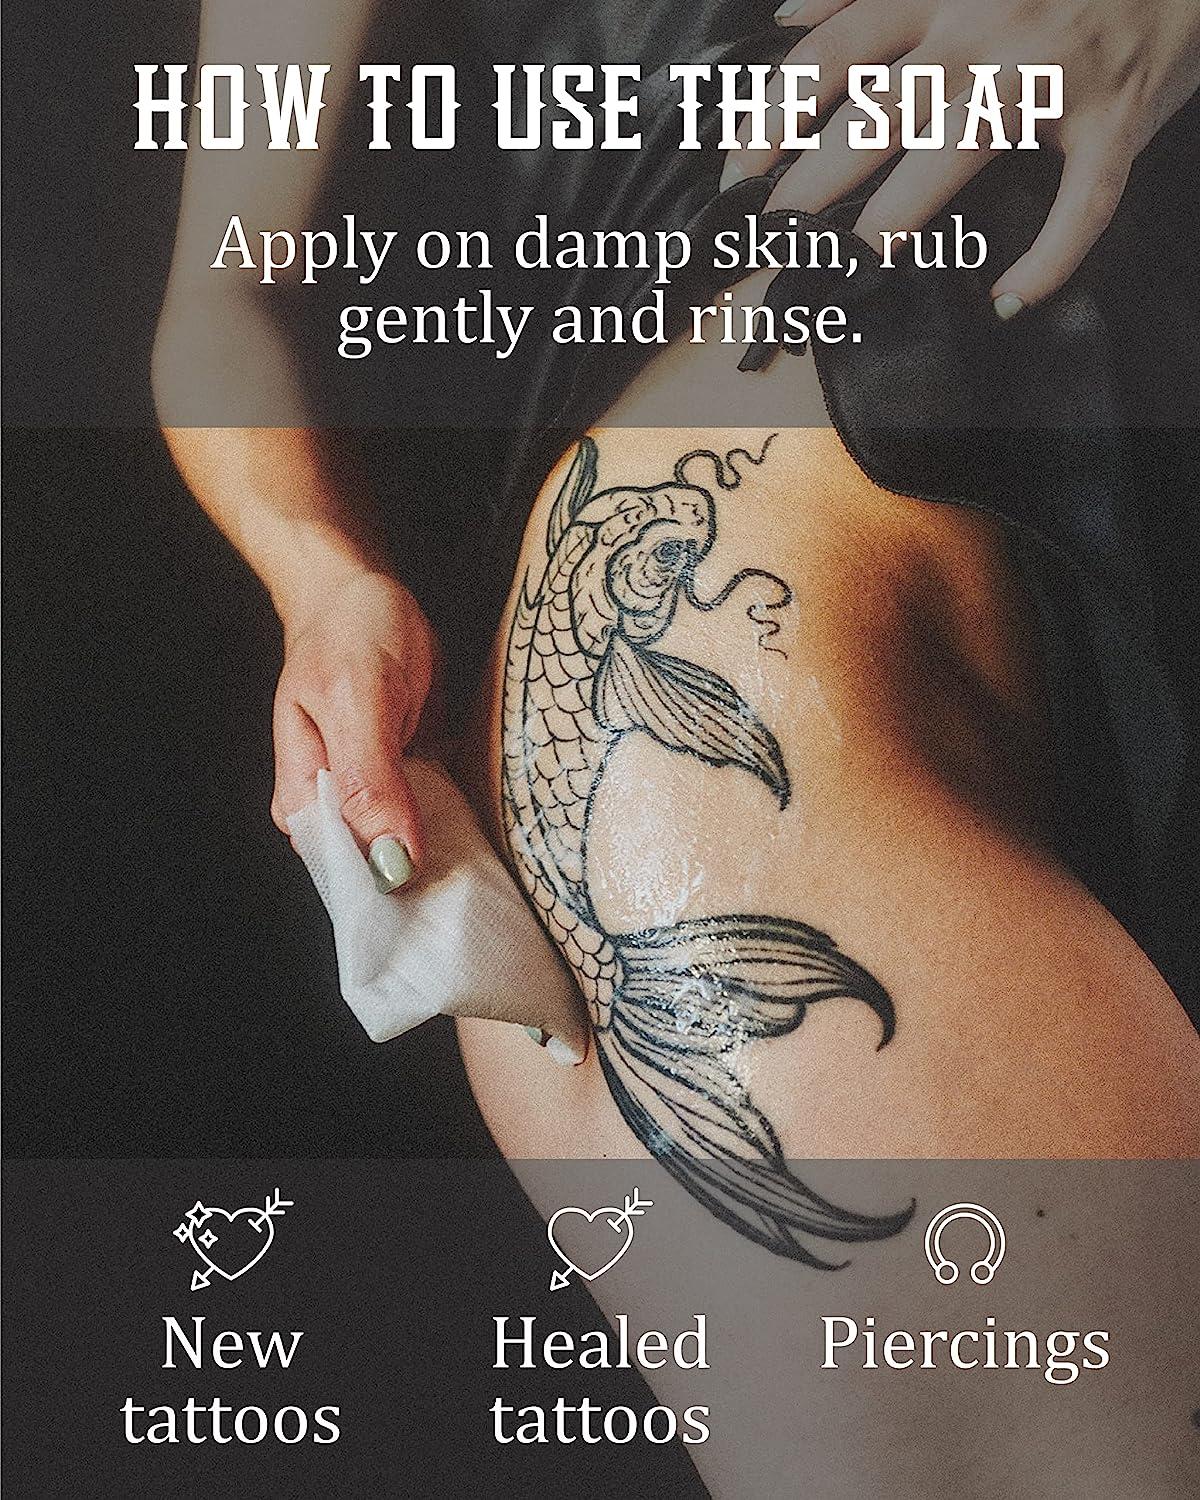 Tattoo Balm & Aftercare Cream- Color Enhancement that Revives Old Tattoos,  Hydrates New Tattoos, Made With Natural Ingredients + Petroleum Free, Daily  Tattoo Lotion Moisturizer & Brightener - Walmart.com